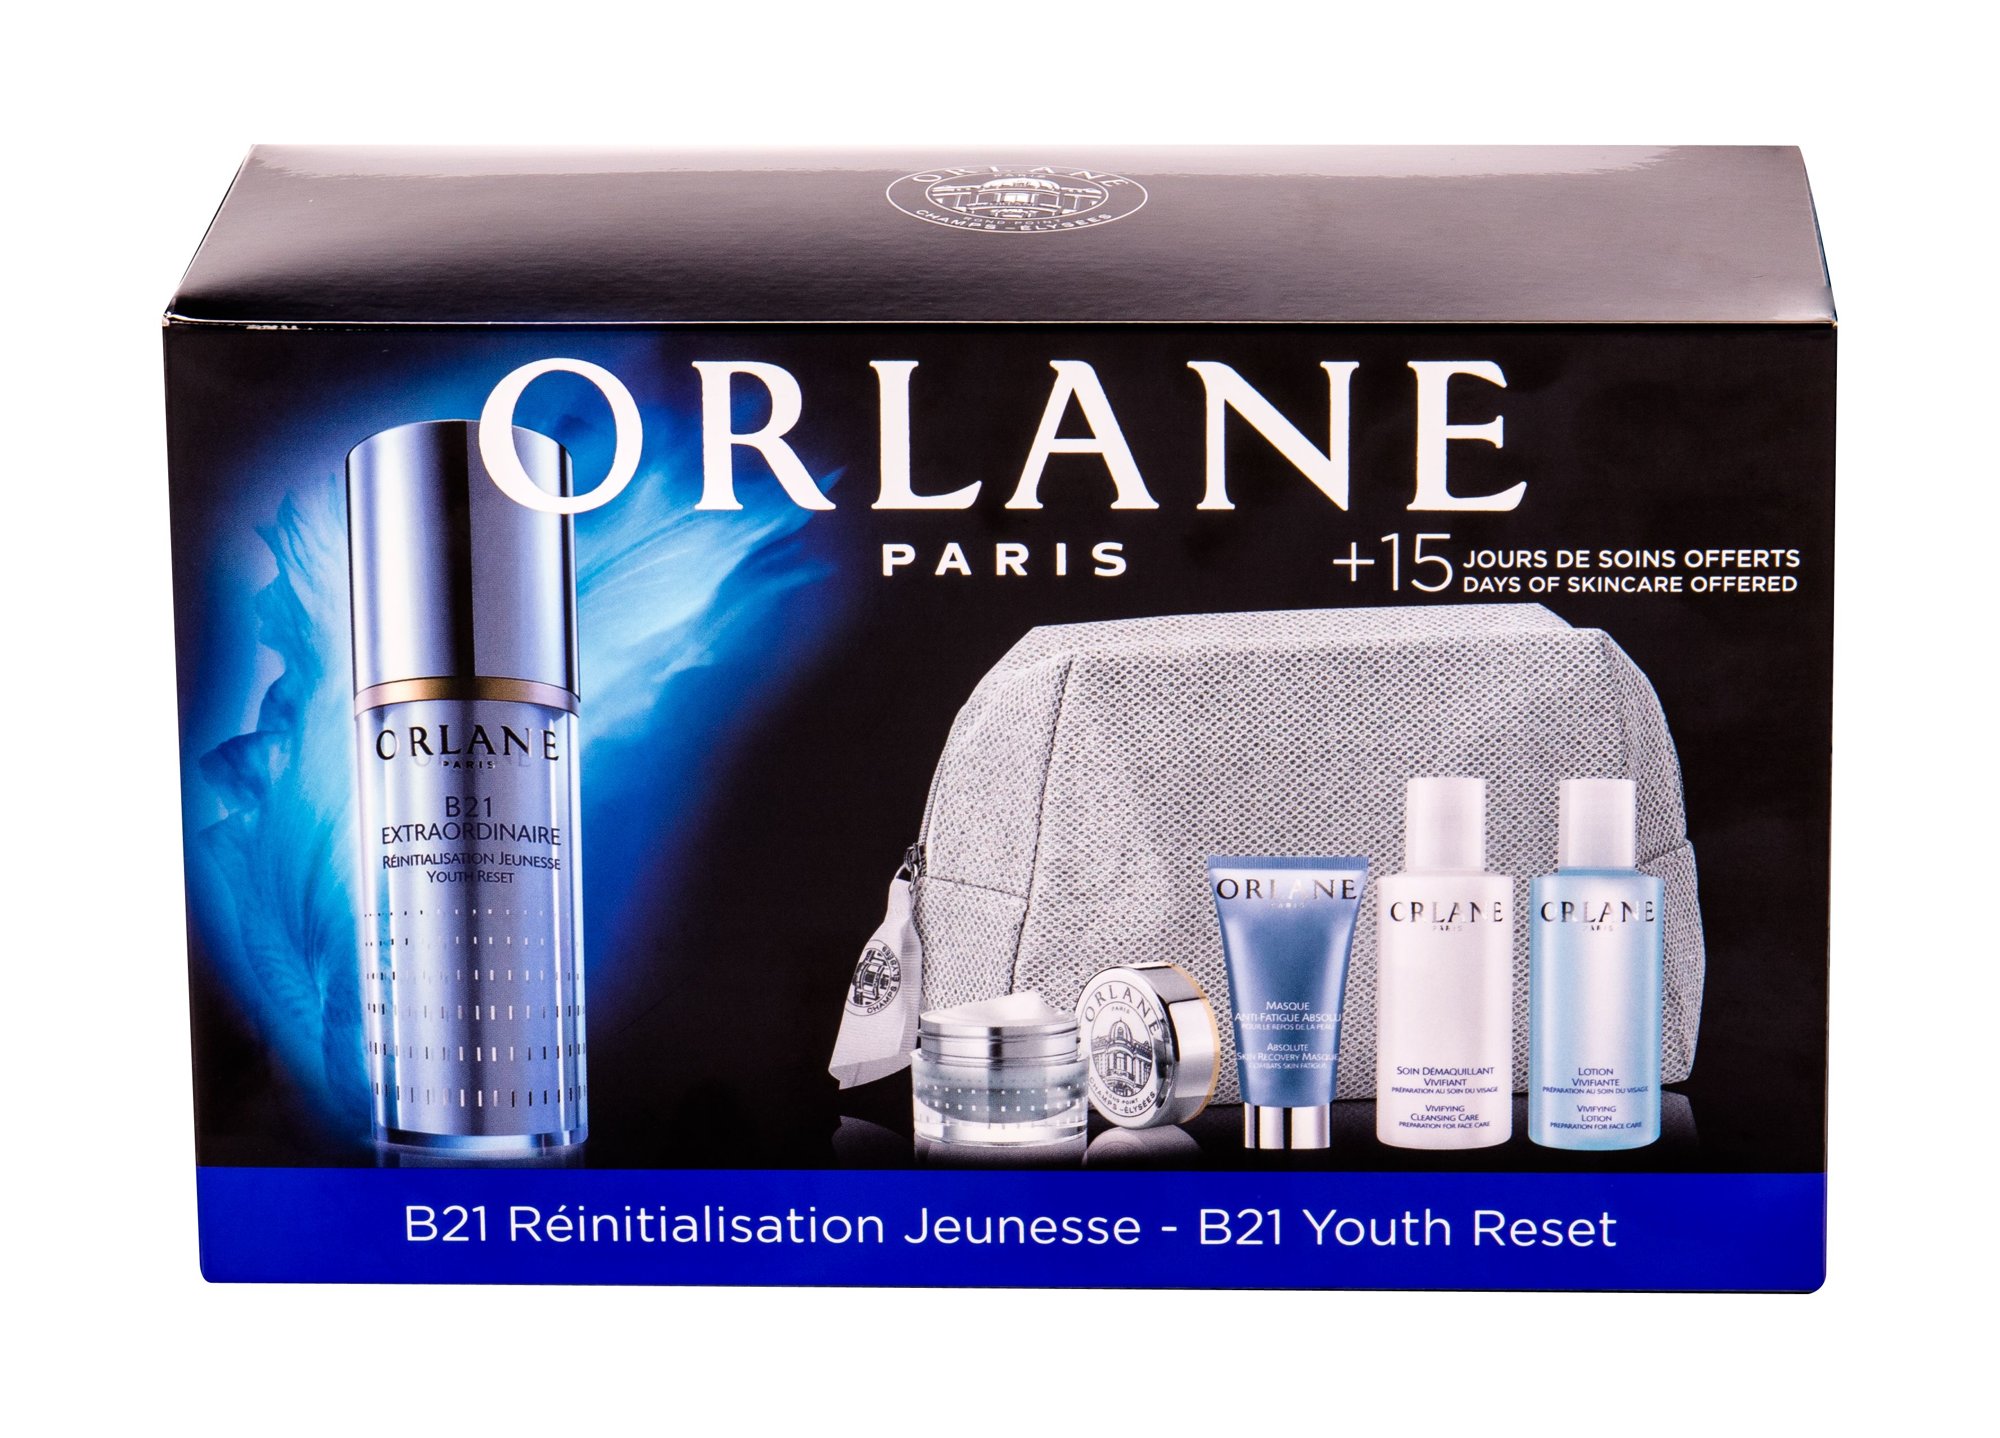 Orlane B21 Extraordinaire Youth Reset 30ml Facial Serum 30 ml + Day Care 7,5 ml + Absolute Skin Recovery Mask 15 ml + Cleansing Milk 50 ml + Cleansing Care 50 ml Veido serumas Rinkinys